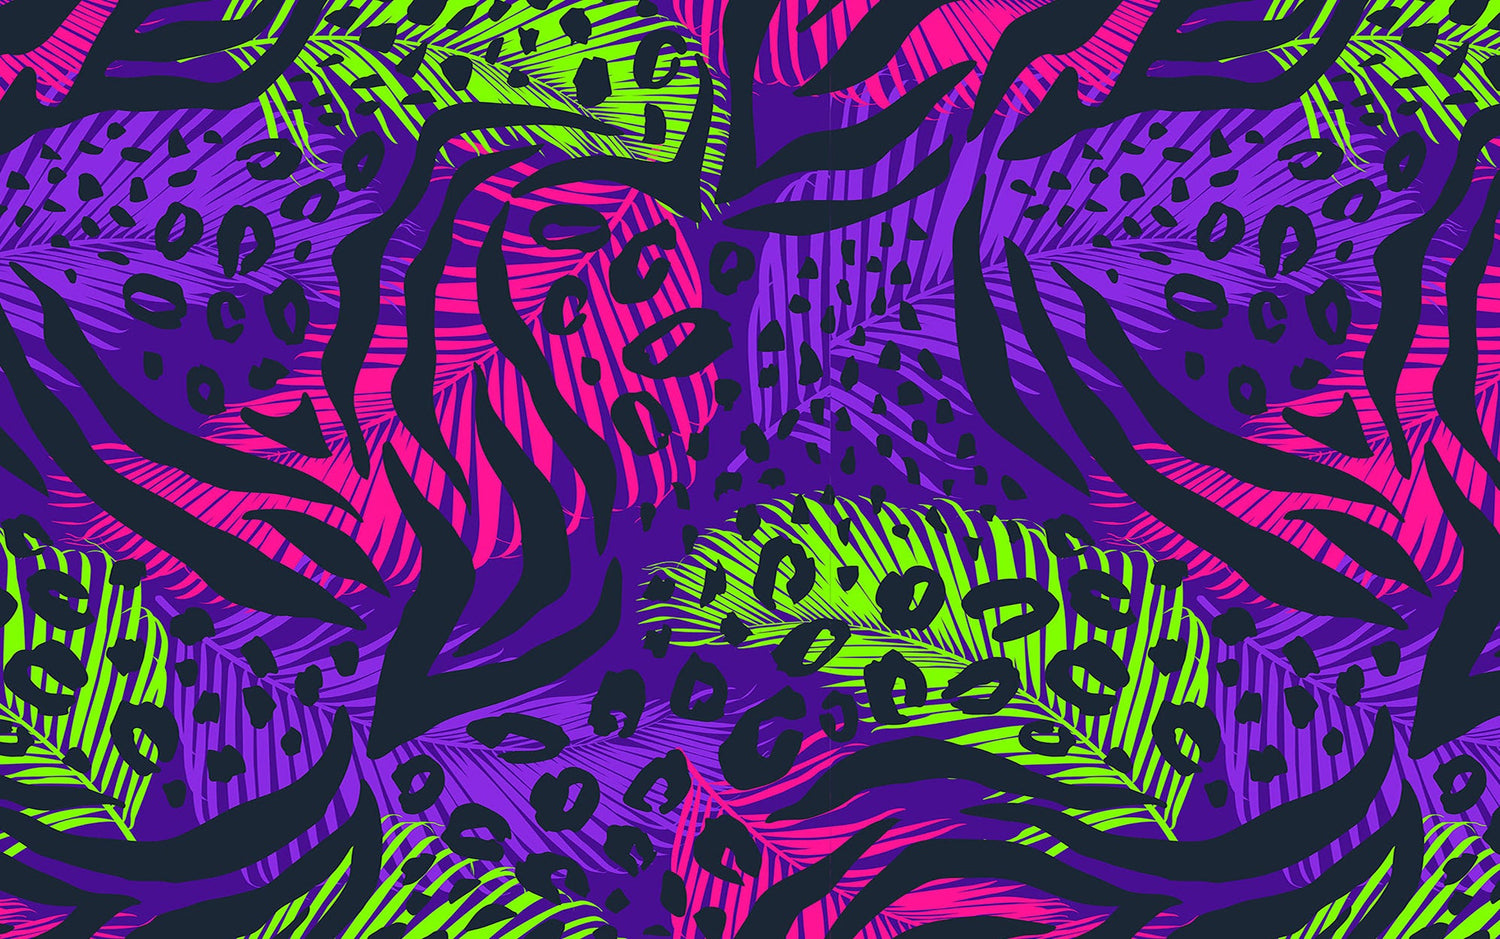 An abstract wall mural featuring a vibrant jungle theme with purple, green, and pink patterns.